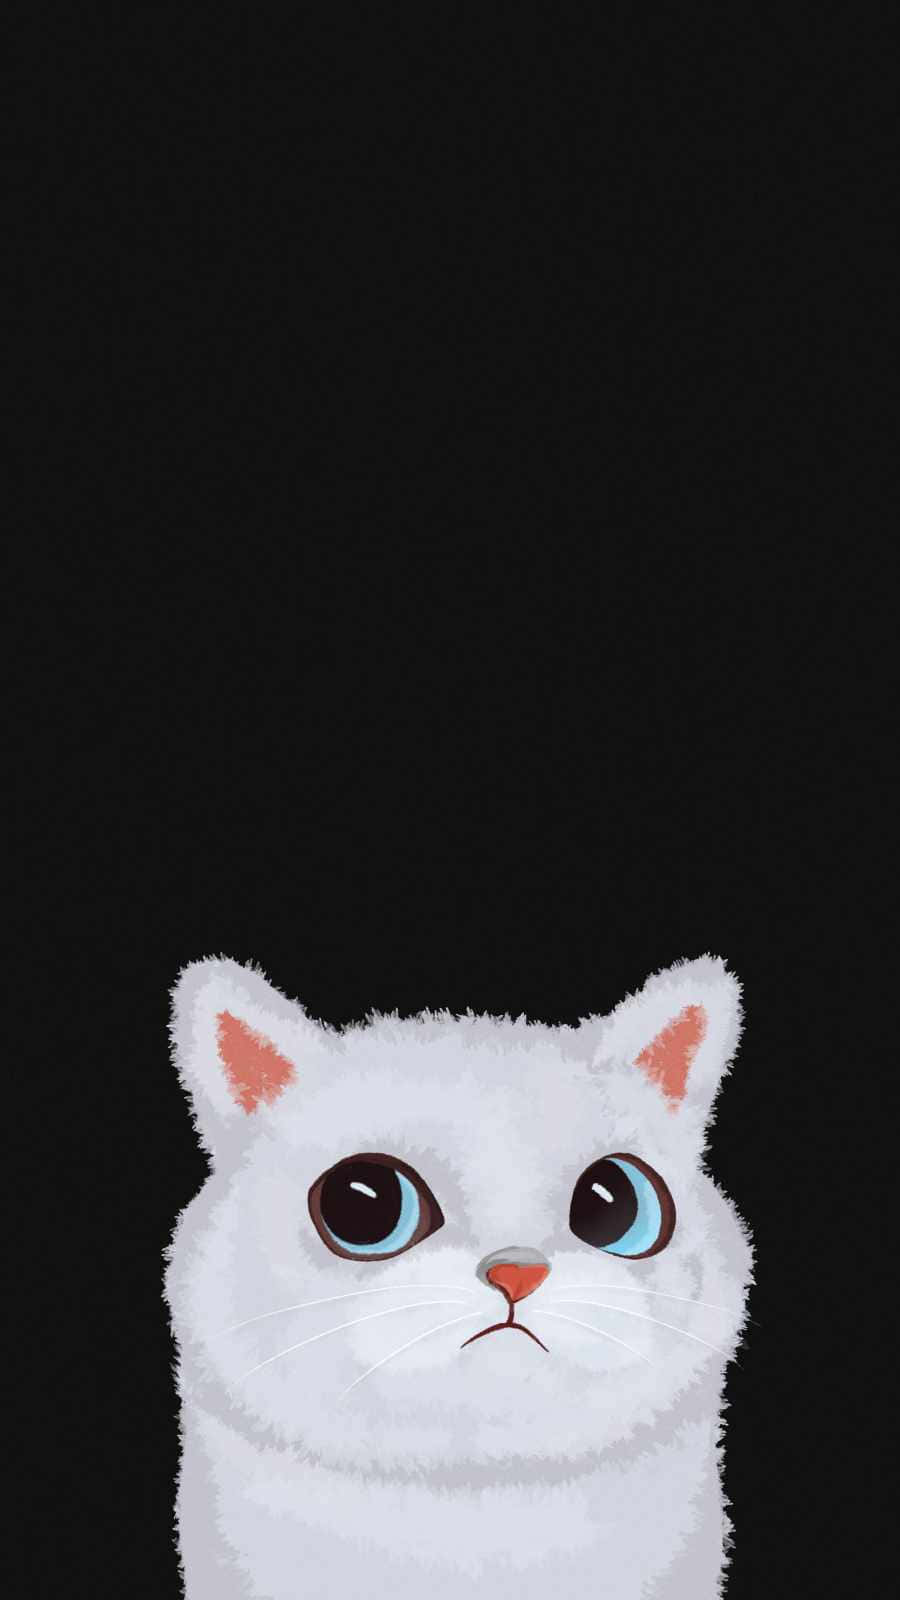 A White Cat With Blue Eyes On A Black Background Wallpaper